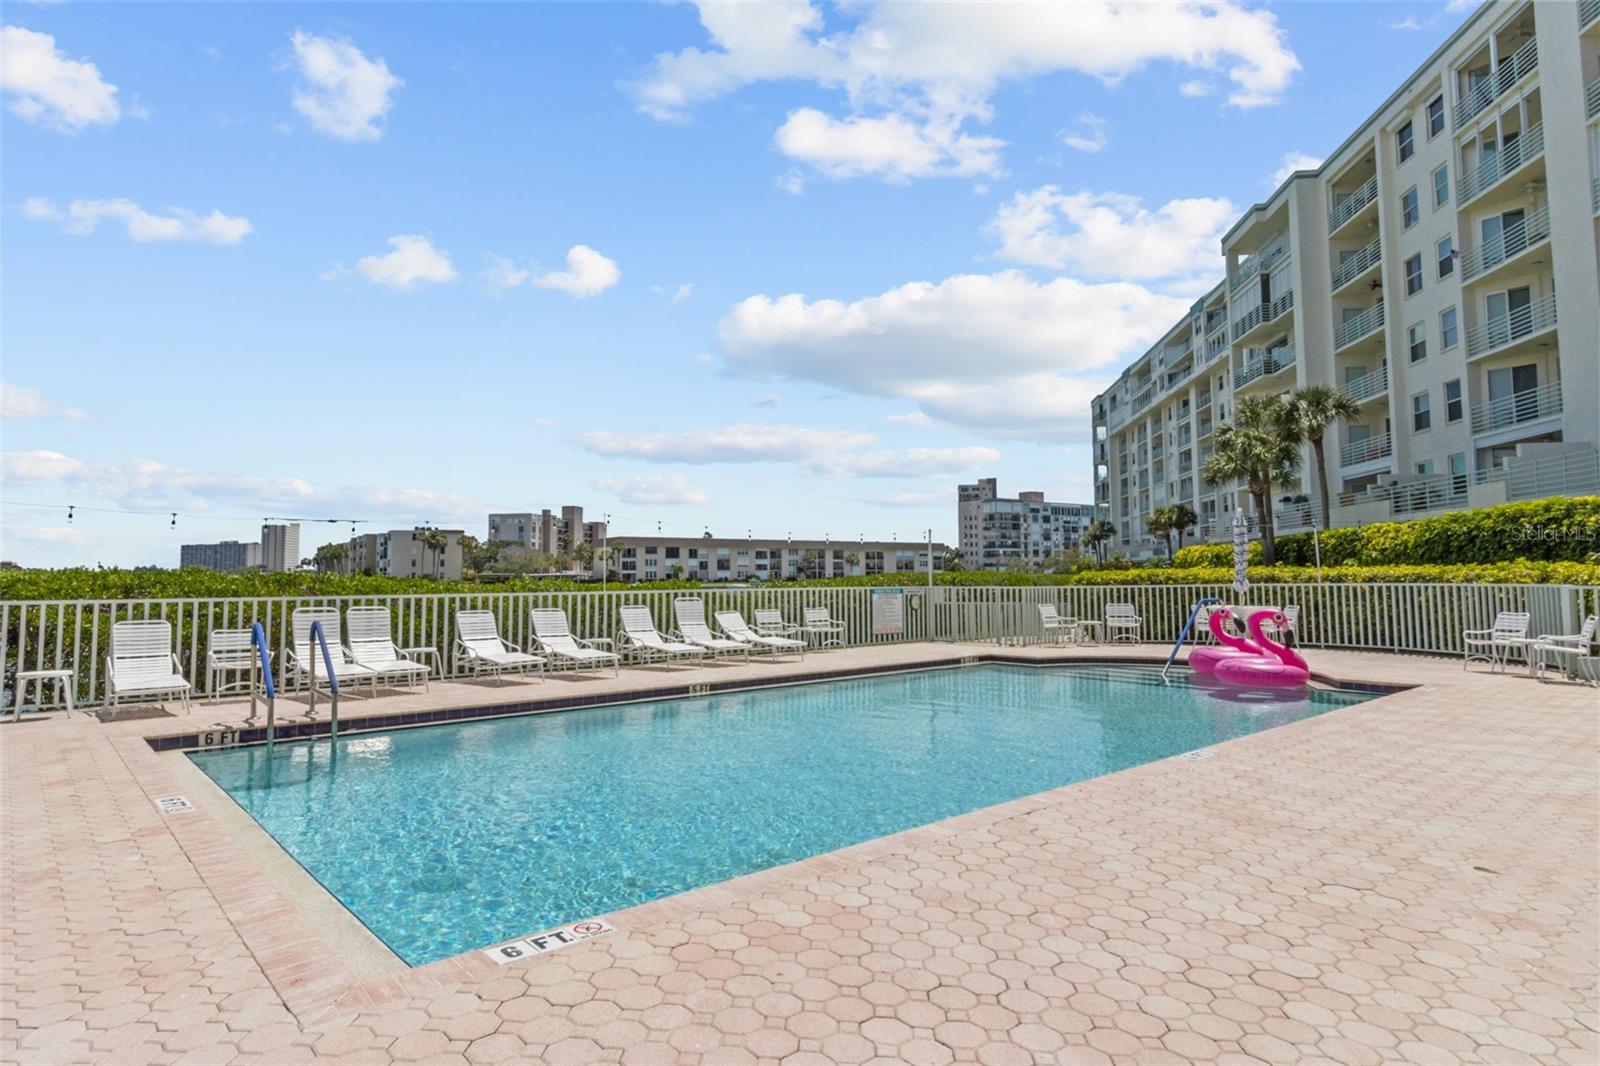 Whether you prefer to float around the pool & enjoy the water vistas or swim some laps, this pool is steps away from the condo!